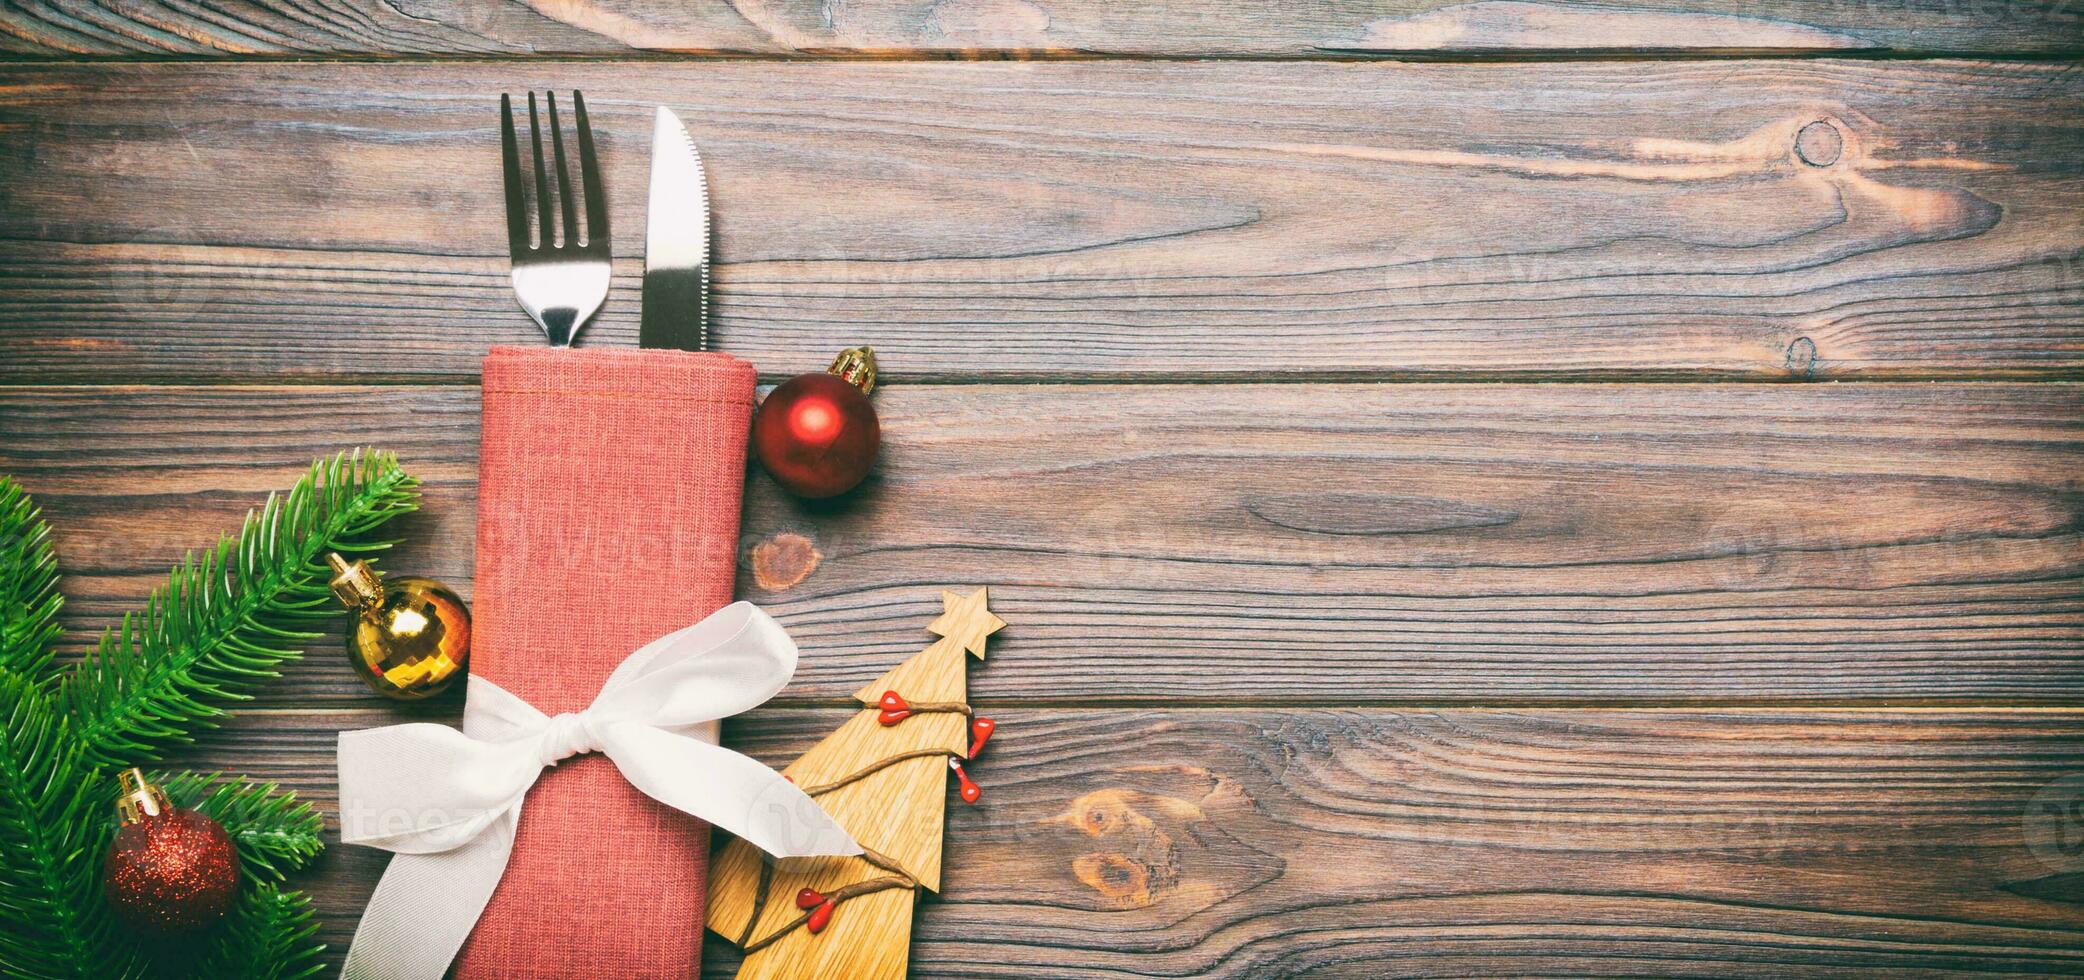 Top view Banner of fork and knife on napkin with christmas decorations and new year tree on wooden background. Holiday and festive concept with copy space photo